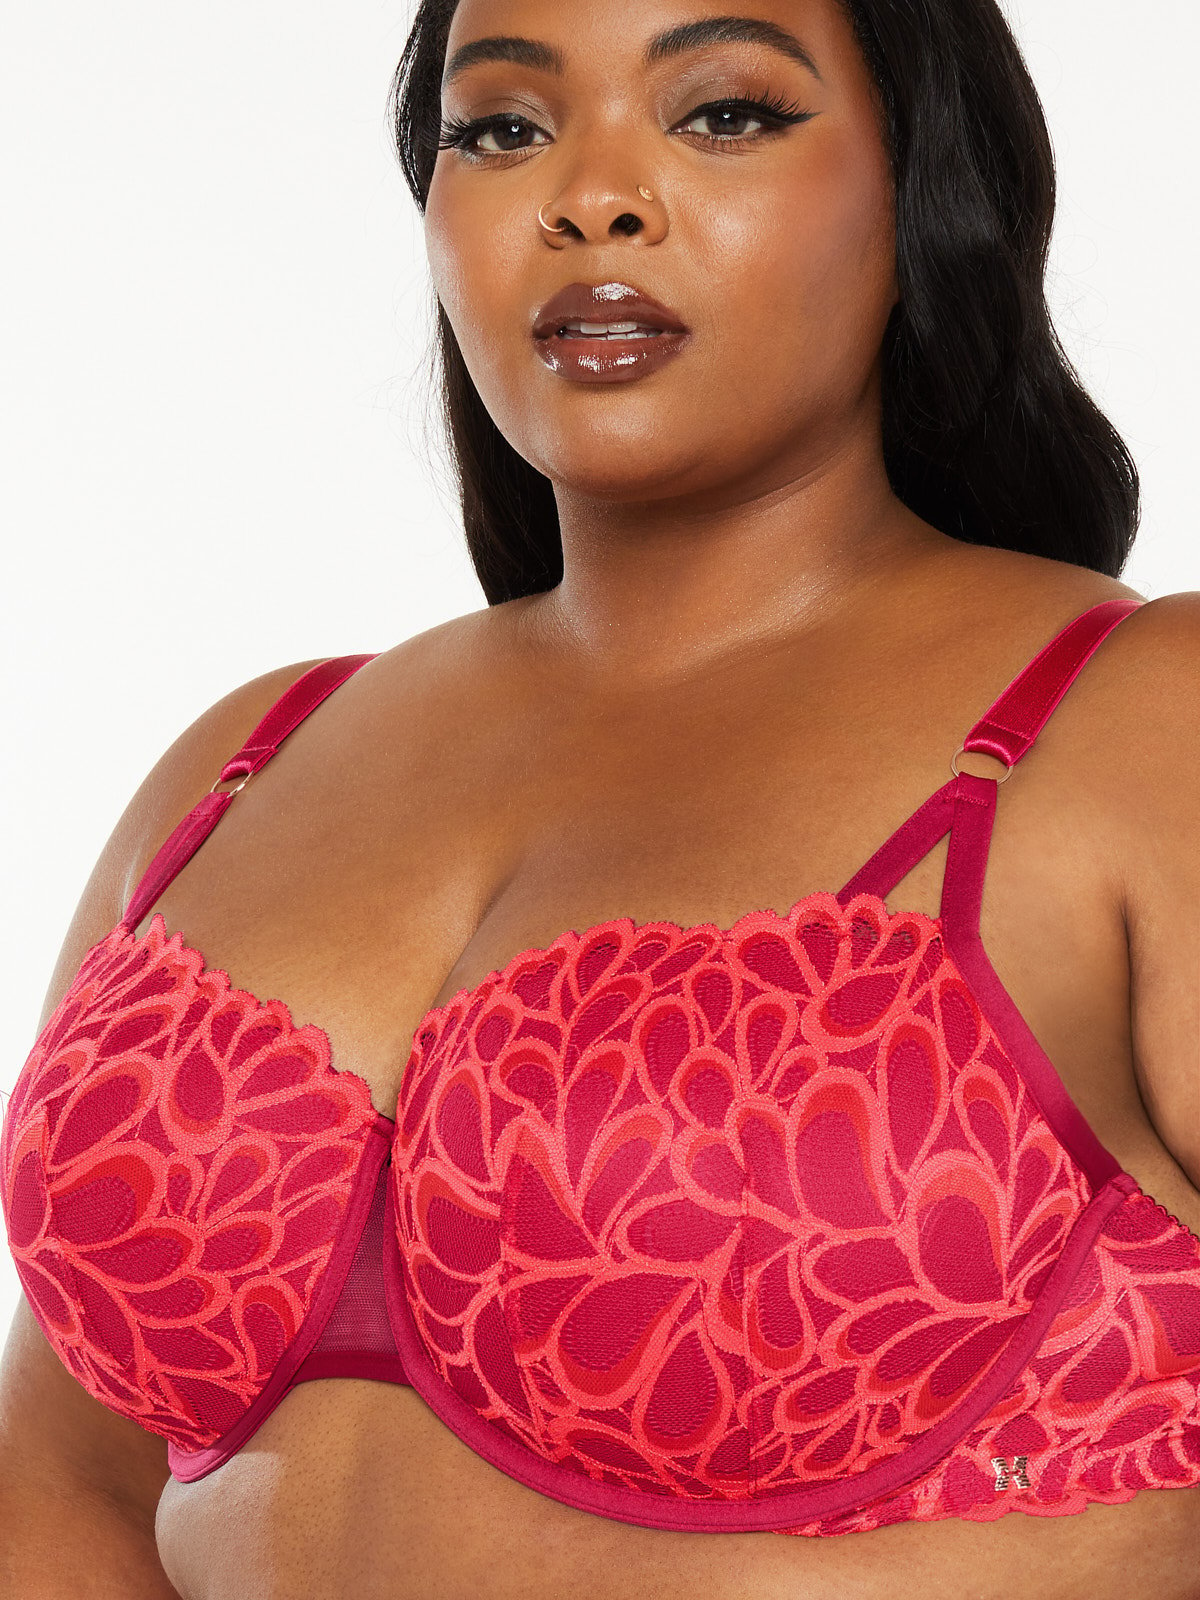 NEW NO TAGS Red Savage X Fenty Not Sorry Lightly Lined Lace Balconette Bra  38C. £18.00 - PicClick UK